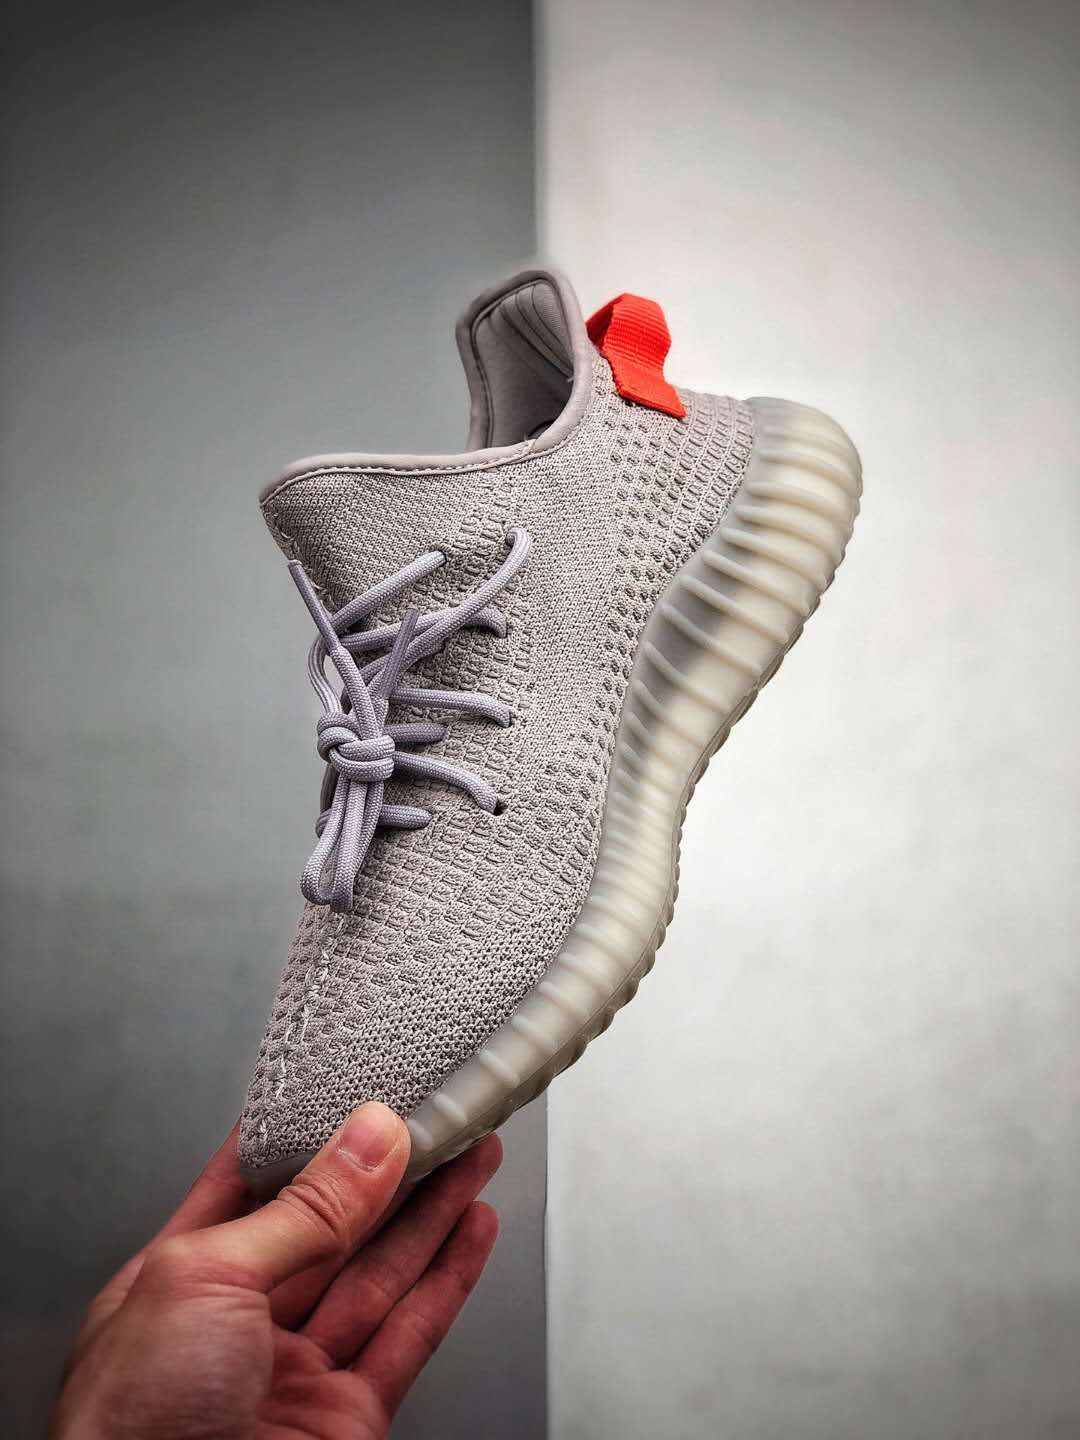 Adidas Yeezy Boost 350 V2 Tail Light FX9017 - Get the Latest Yeezy Style Now